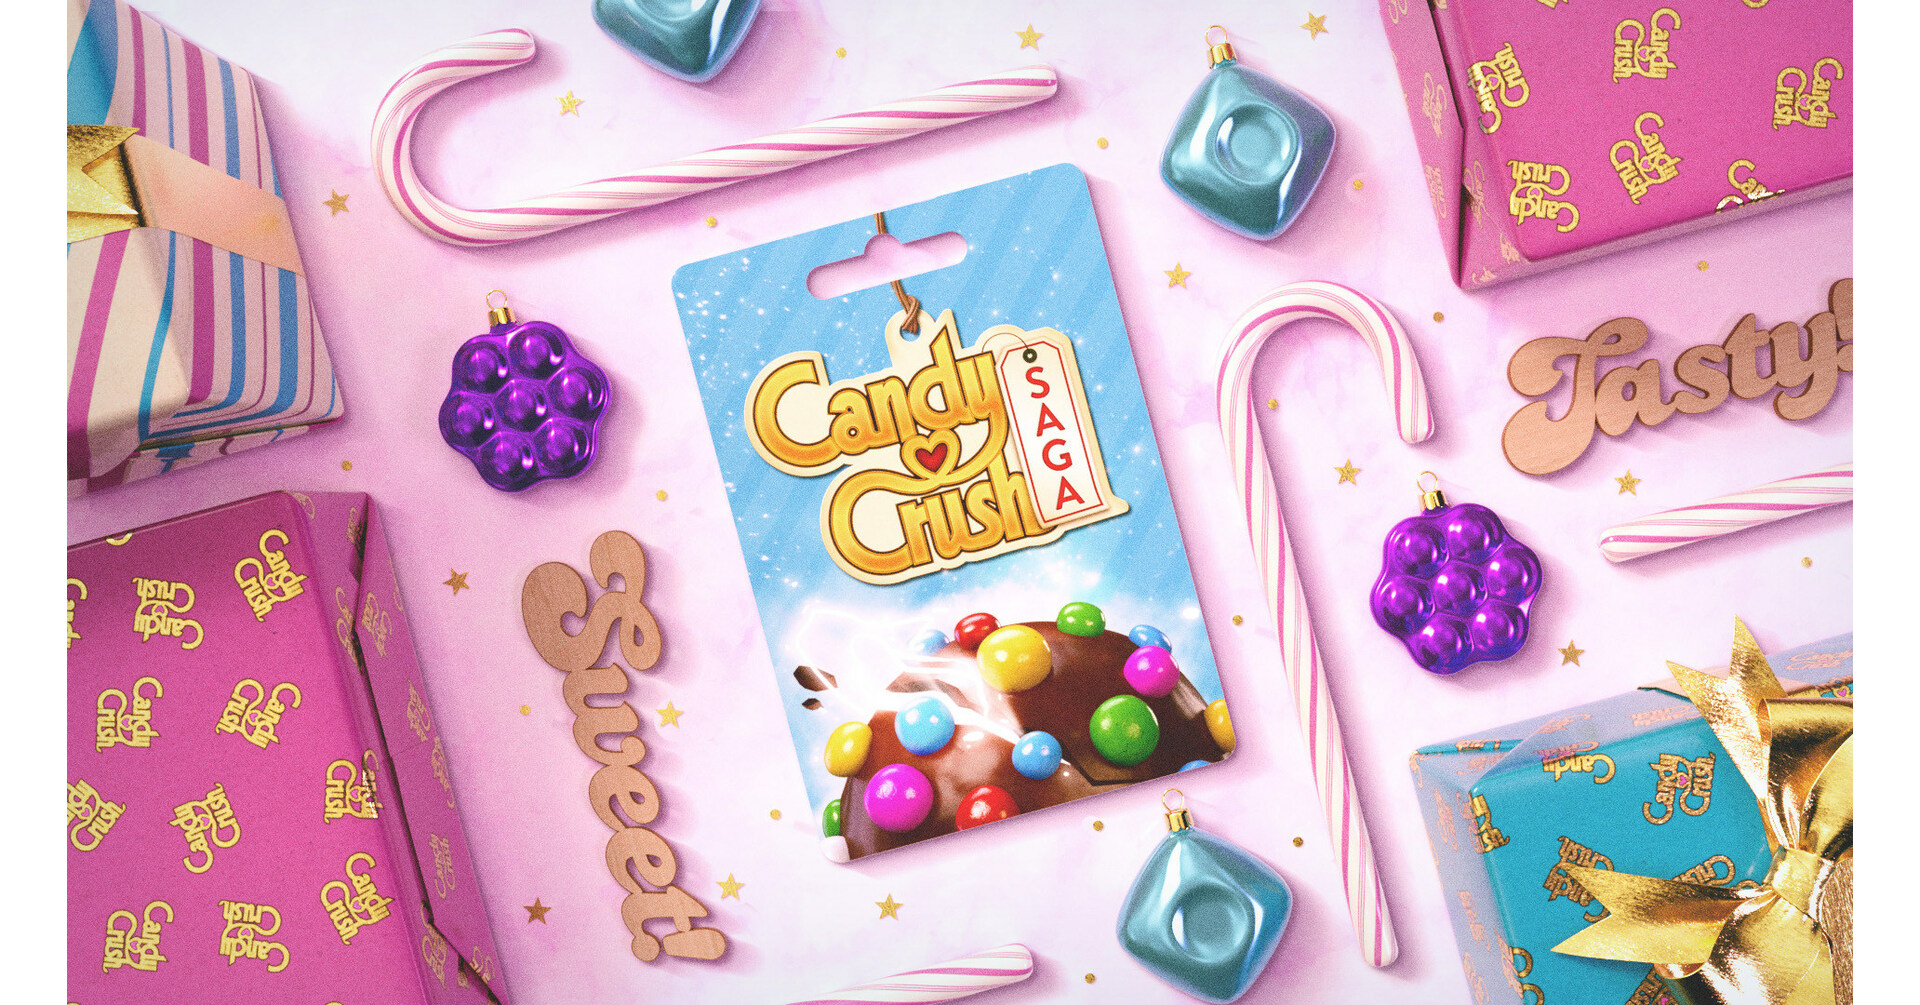 Sweet! After a year, 'Candy Crush' is still king of mobile